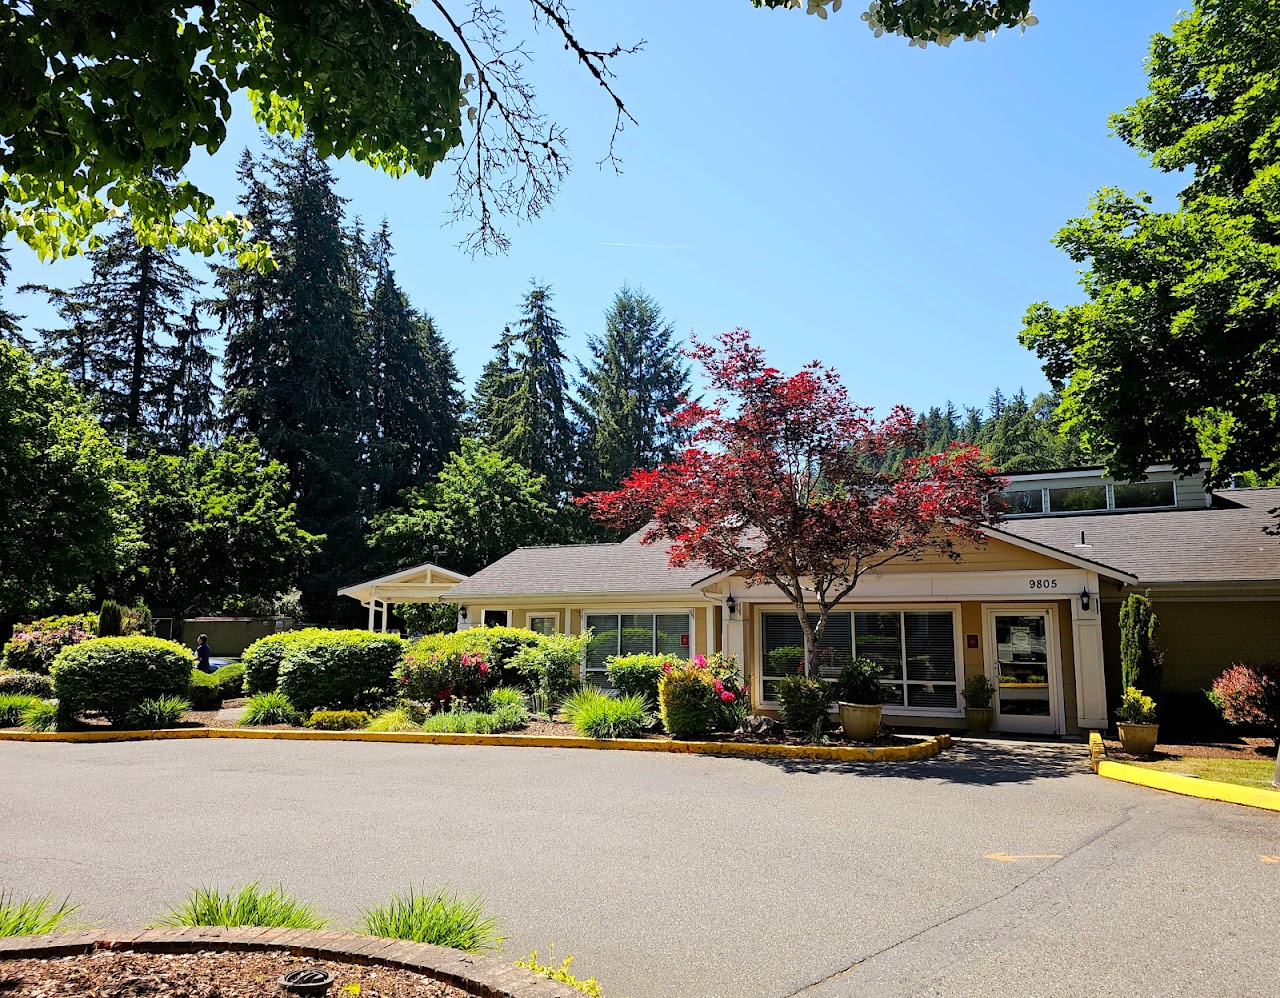 Photo of SUMMERWOOD APARTMENTS. Affordable housing located at 9805 AVONDALE ROAD NE REDMOND, WA 98052